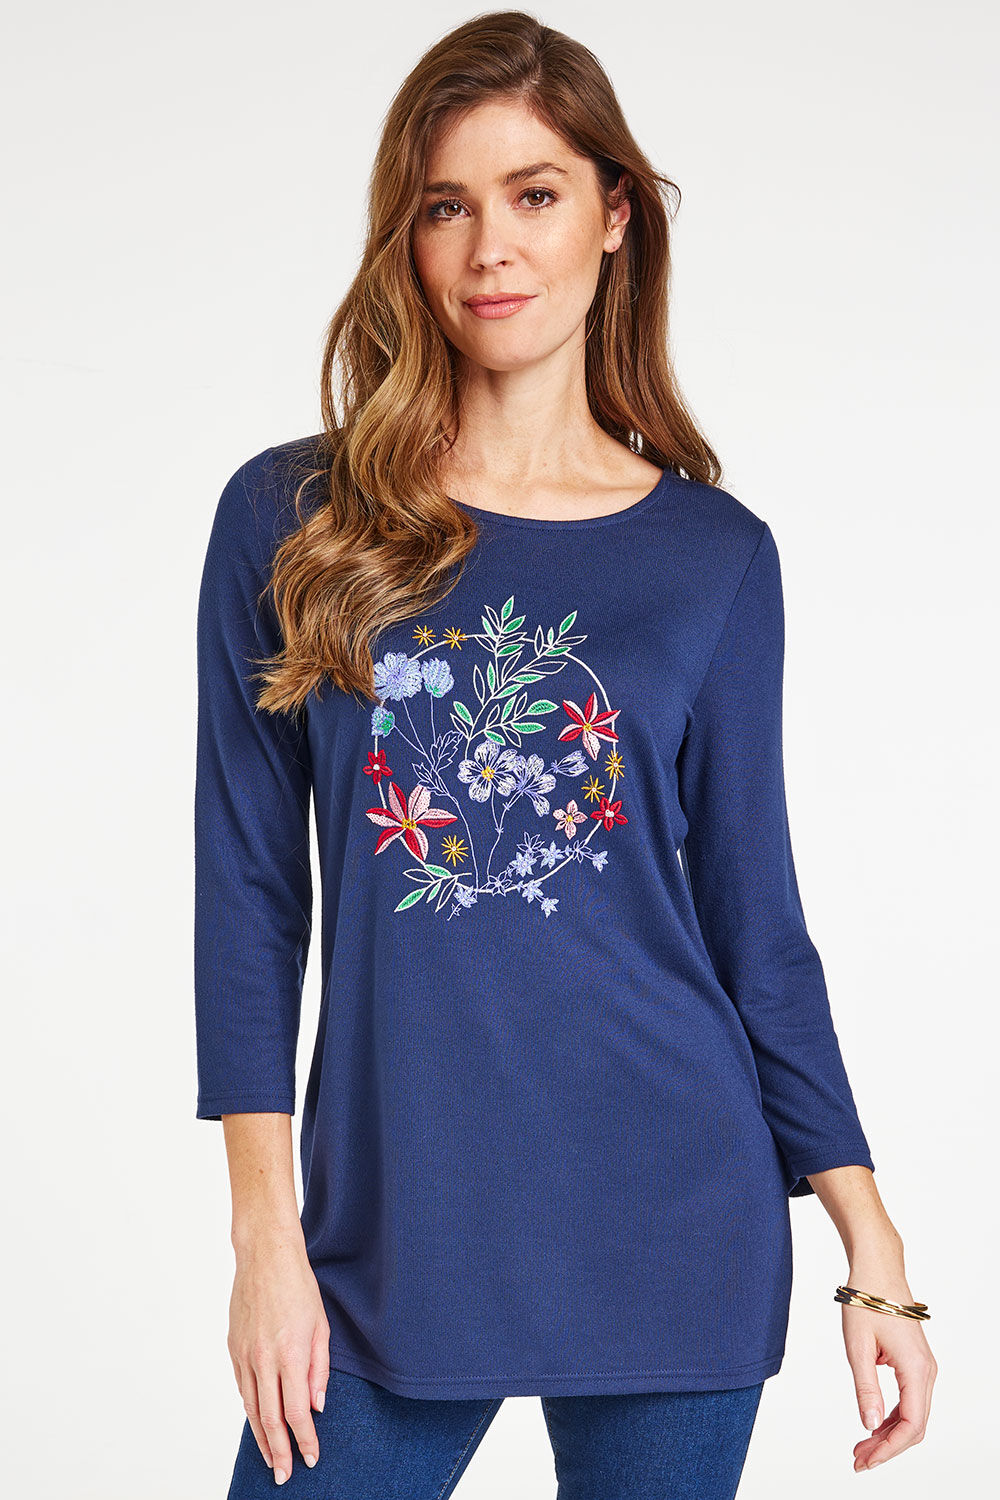 Bonmarche Navy 3/4 Sleeve Circle Floral Embroidered Soft Touch Top, Size: 14